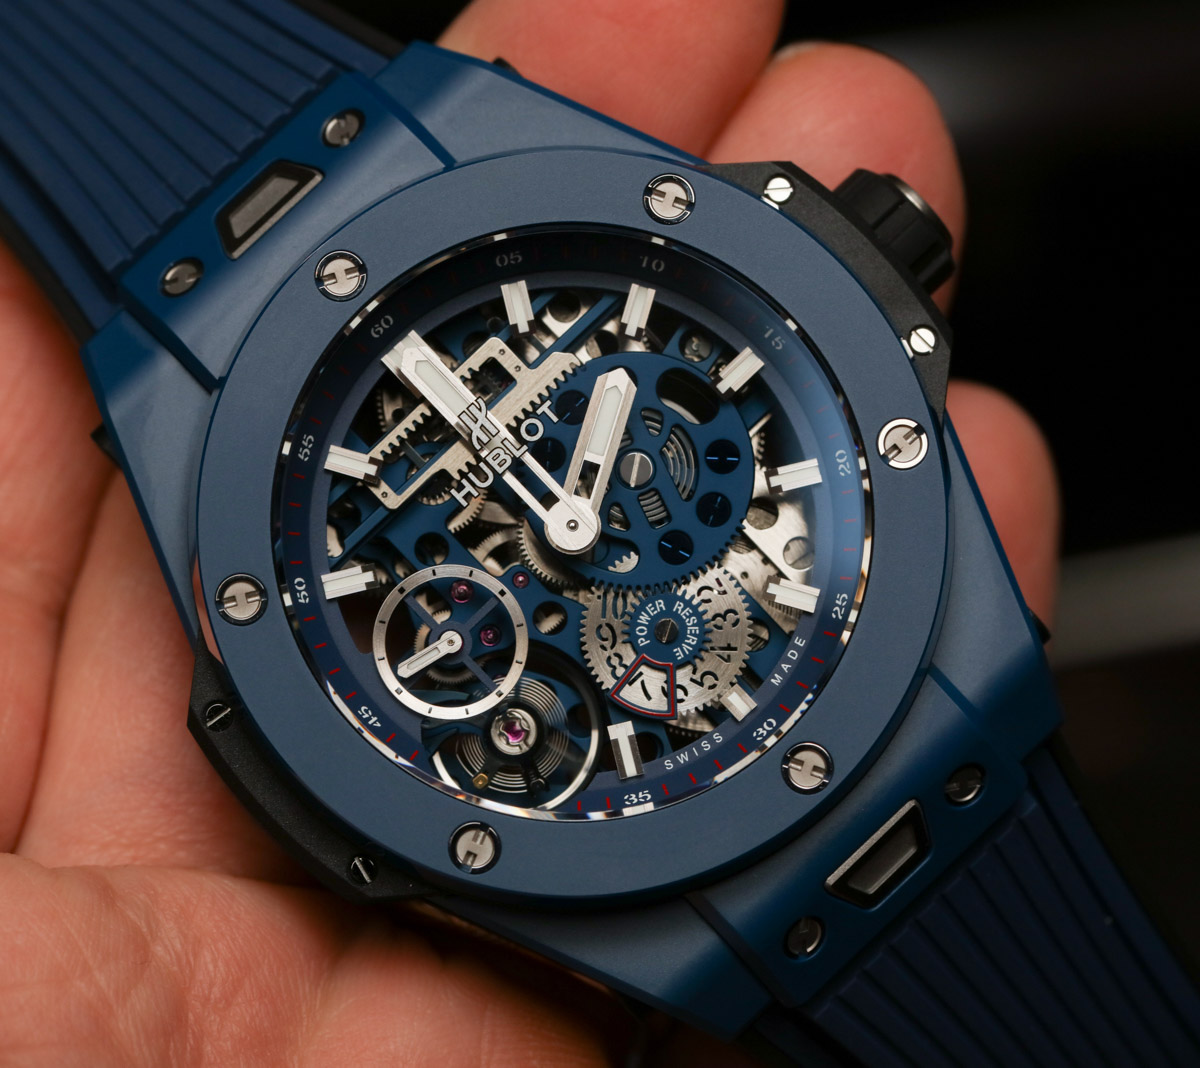 Hublot Meca-10 Ceramic Blue Hands-On & Why This Big Bang Is For Watch Movement Lovers Hands-On 